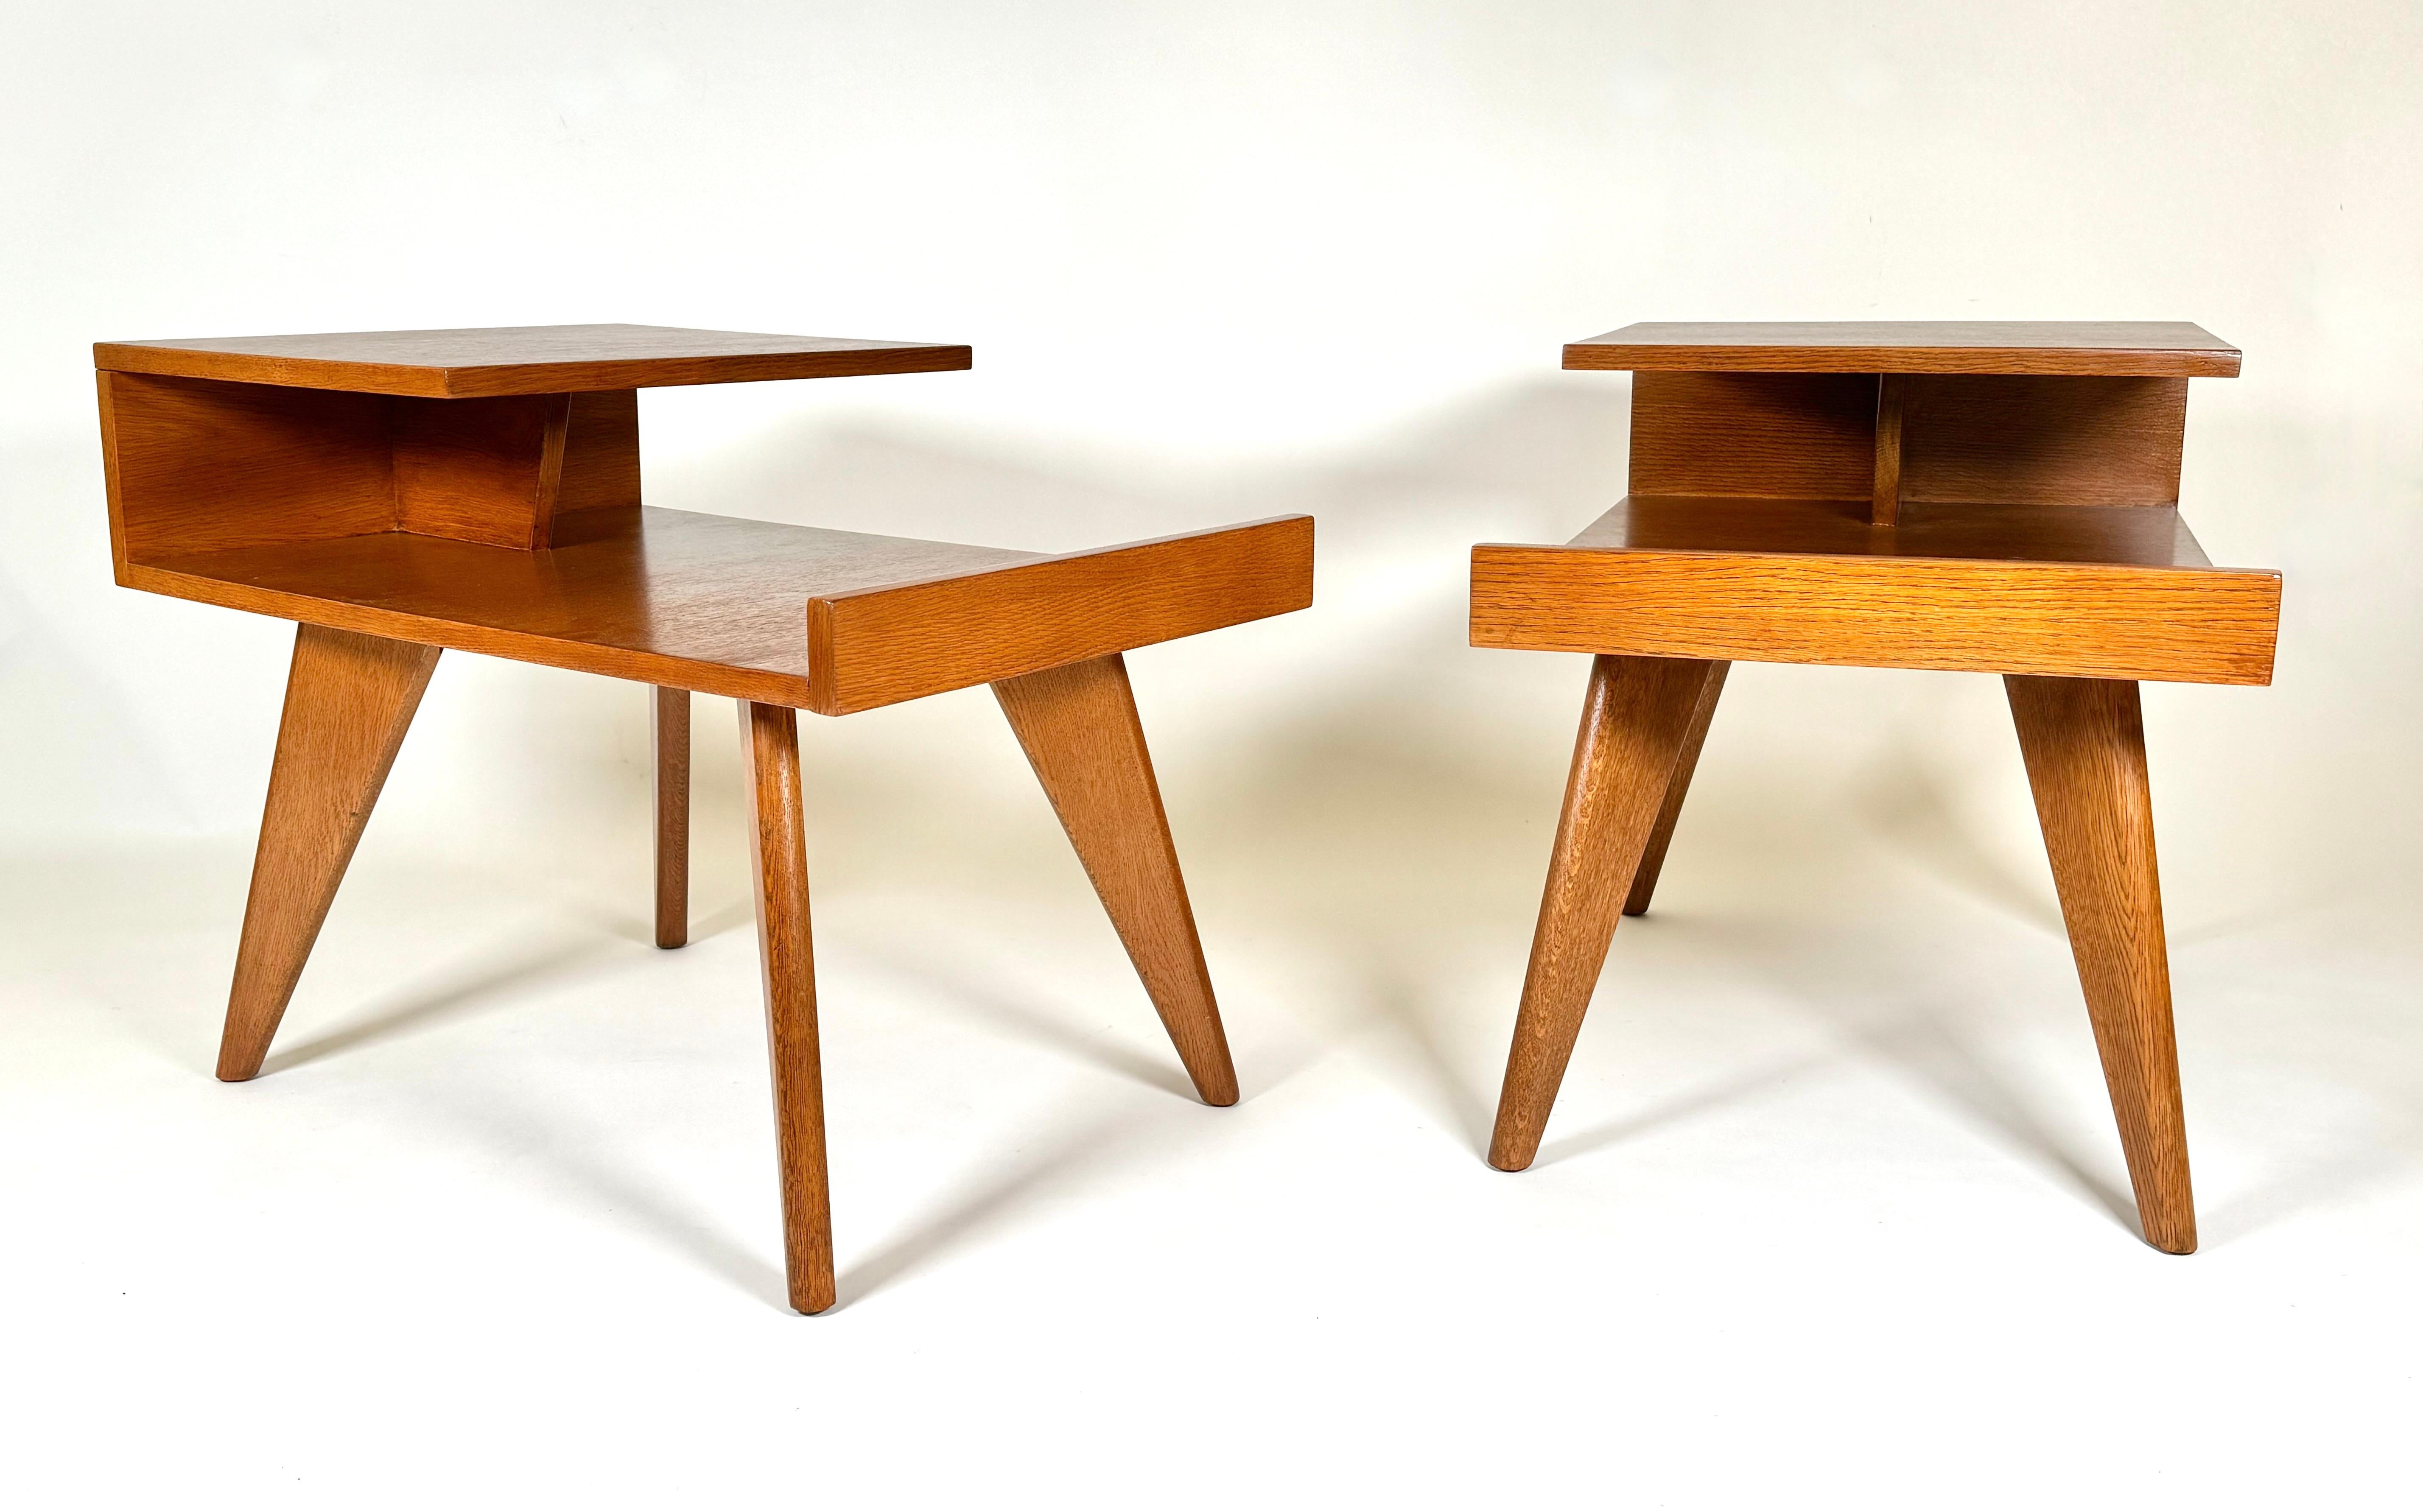 An early design by American  Dan Johnson (1918-1979) for Hayden Hall Furniture, a pair oak side tables with cantilevered tops and striking triangular legs, his early designs had strong architectural lines, similar to the work of architects Richard